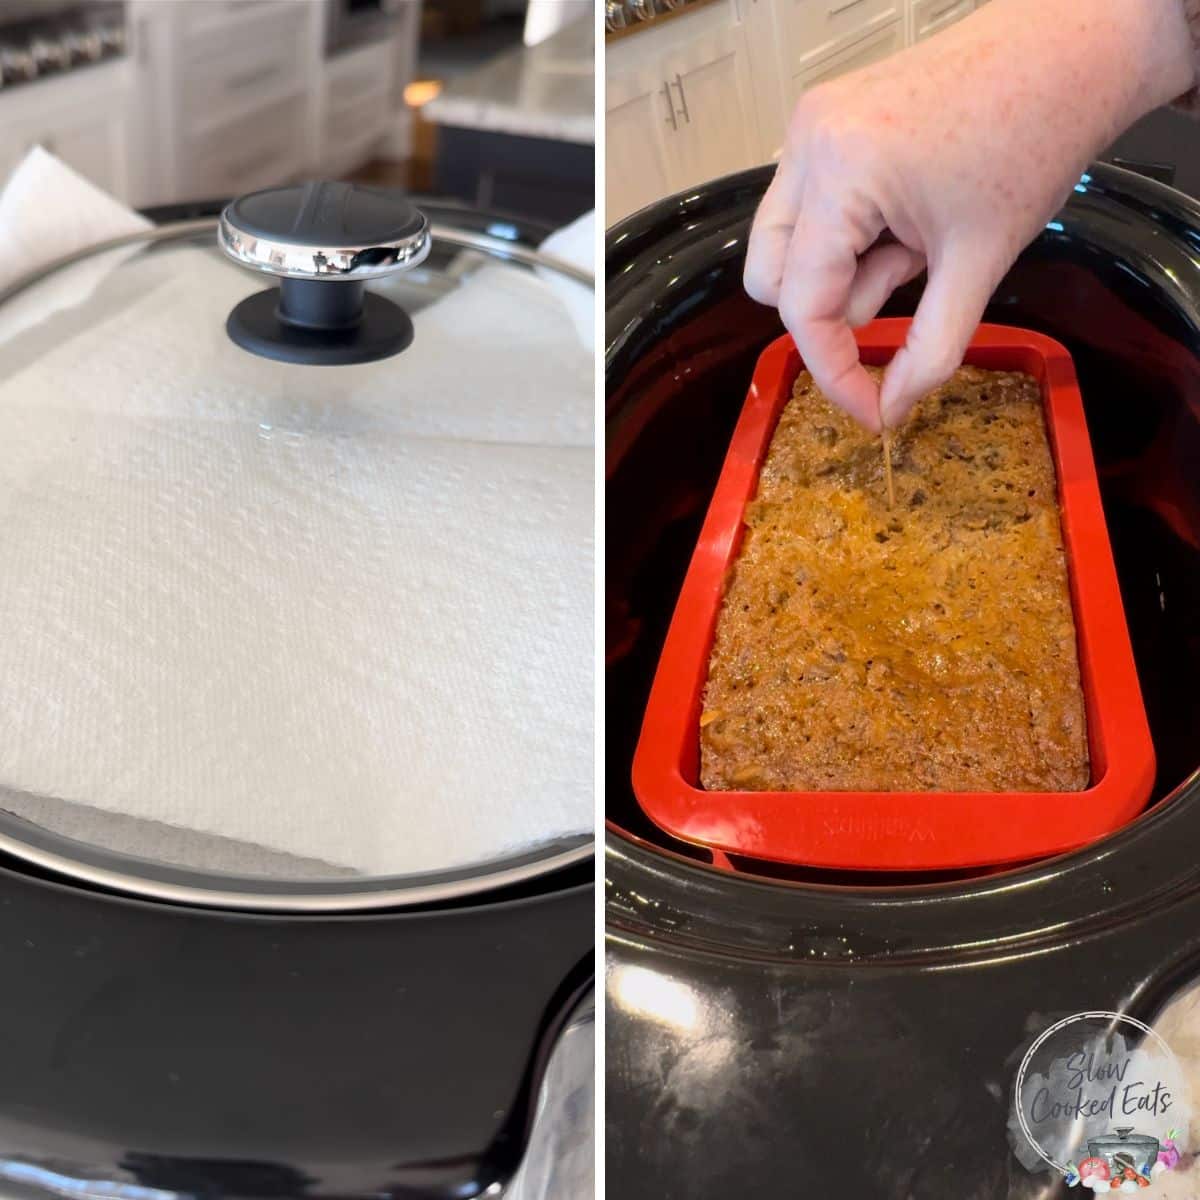 Making banana bread in a crockpot and testing with a toothpick to determine doneness.